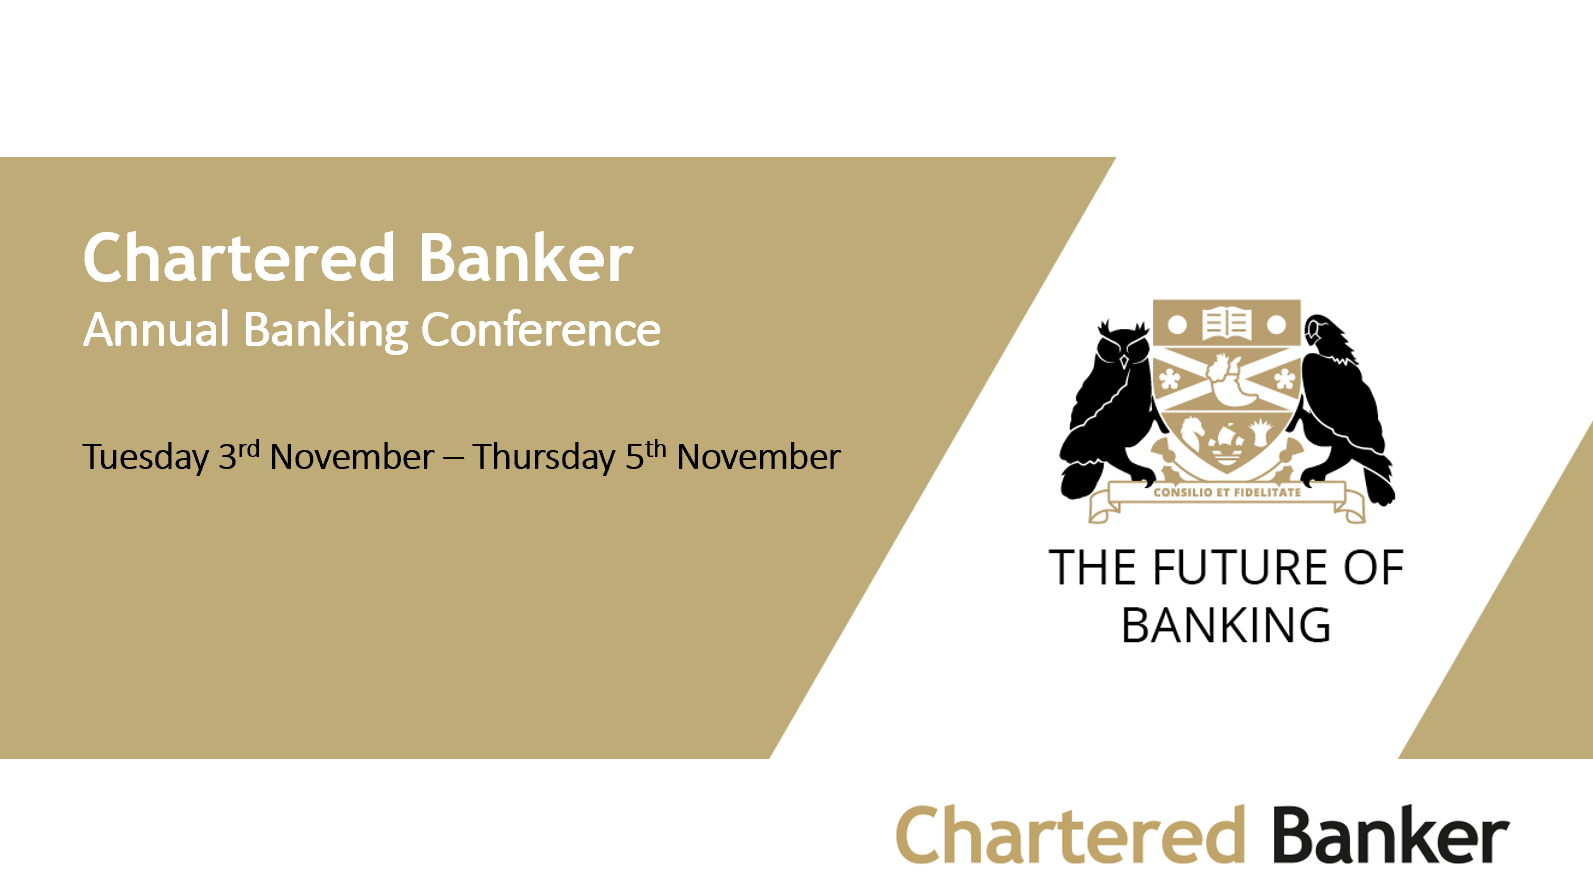 Chartered Banker Institute Annual Banking Conference 2020 - Technology v the People Debate